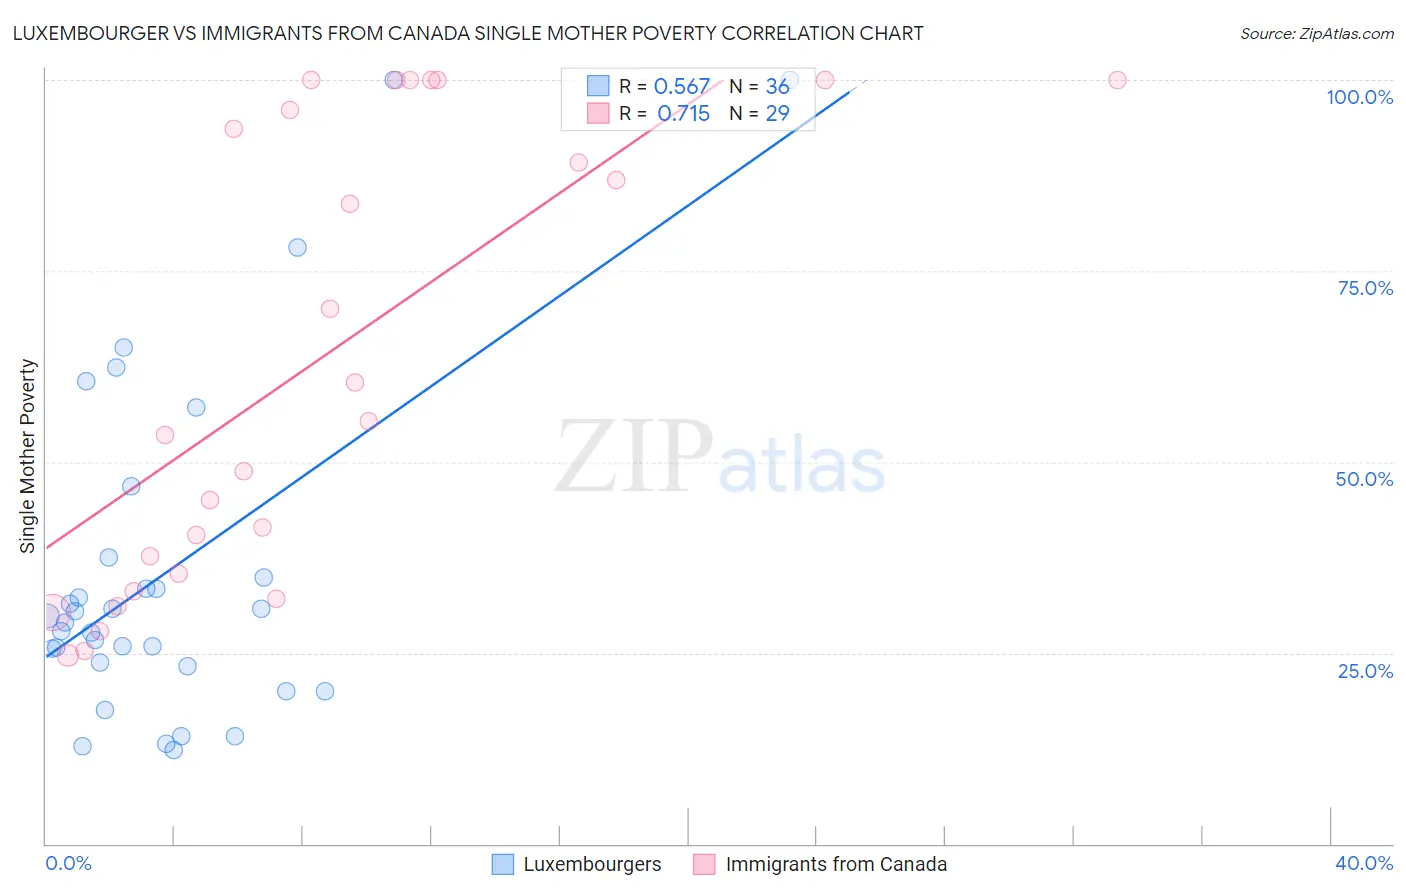 Luxembourger vs Immigrants from Canada Single Mother Poverty